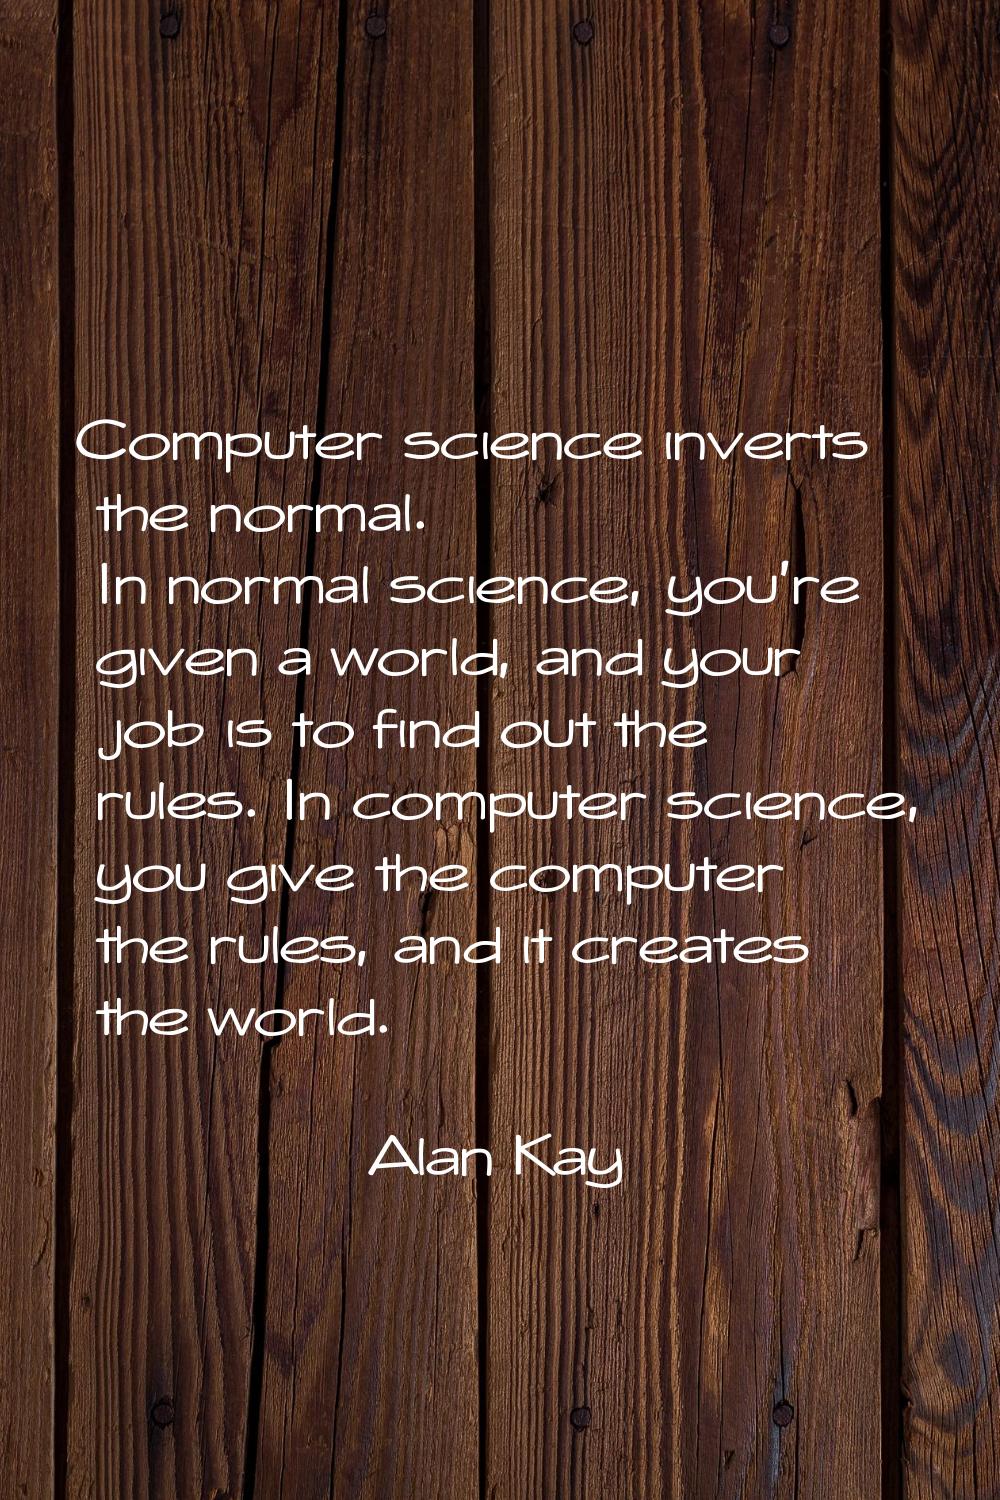 Computer science inverts the normal. In normal science, you're given a world, and your job is to fi